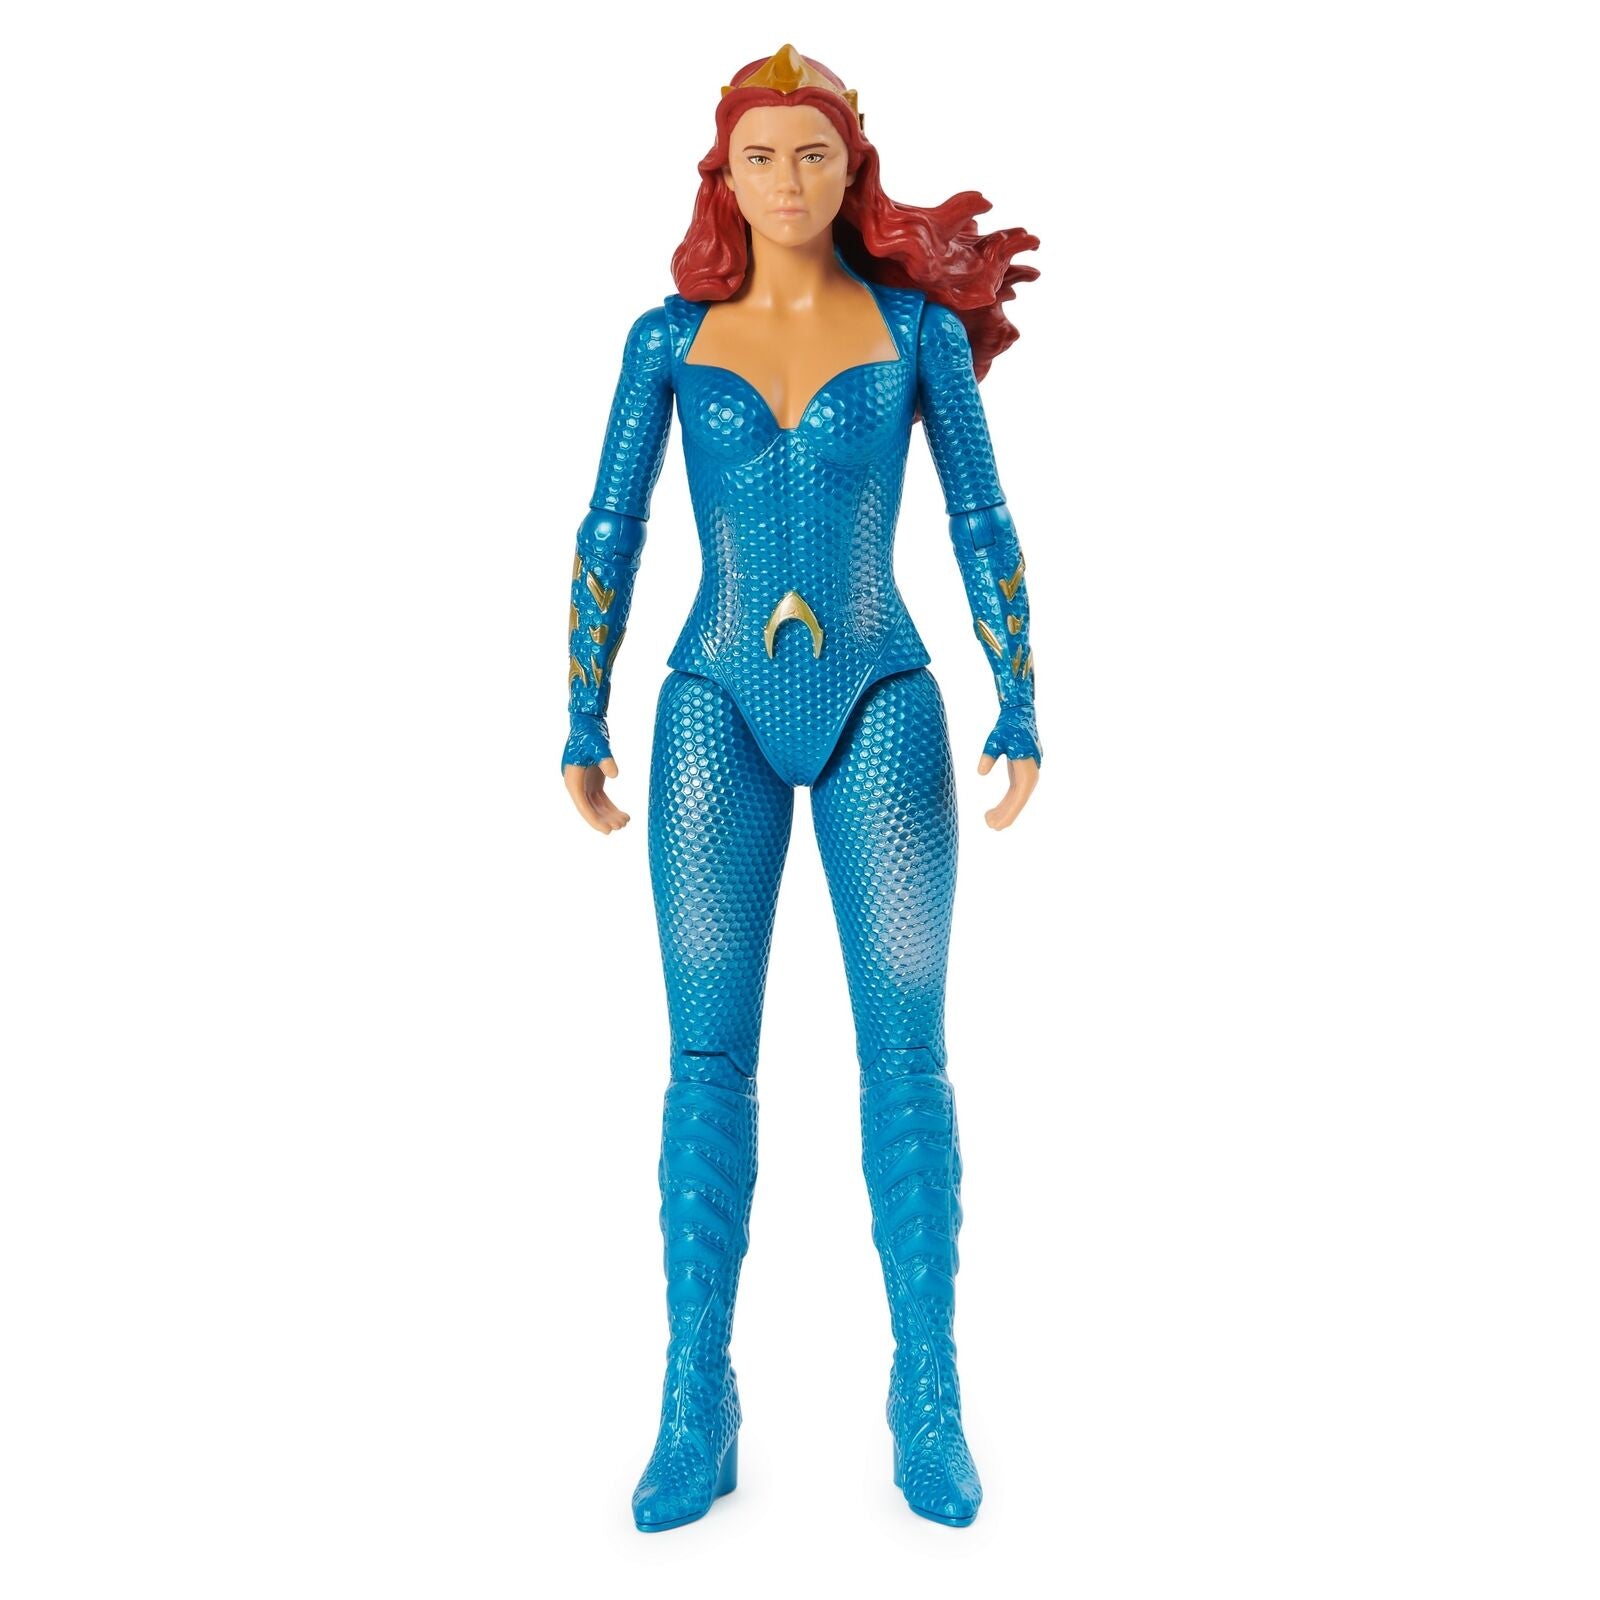 Dc Aquaman and the lost Kingdom - Mera  Action figure 12 inch